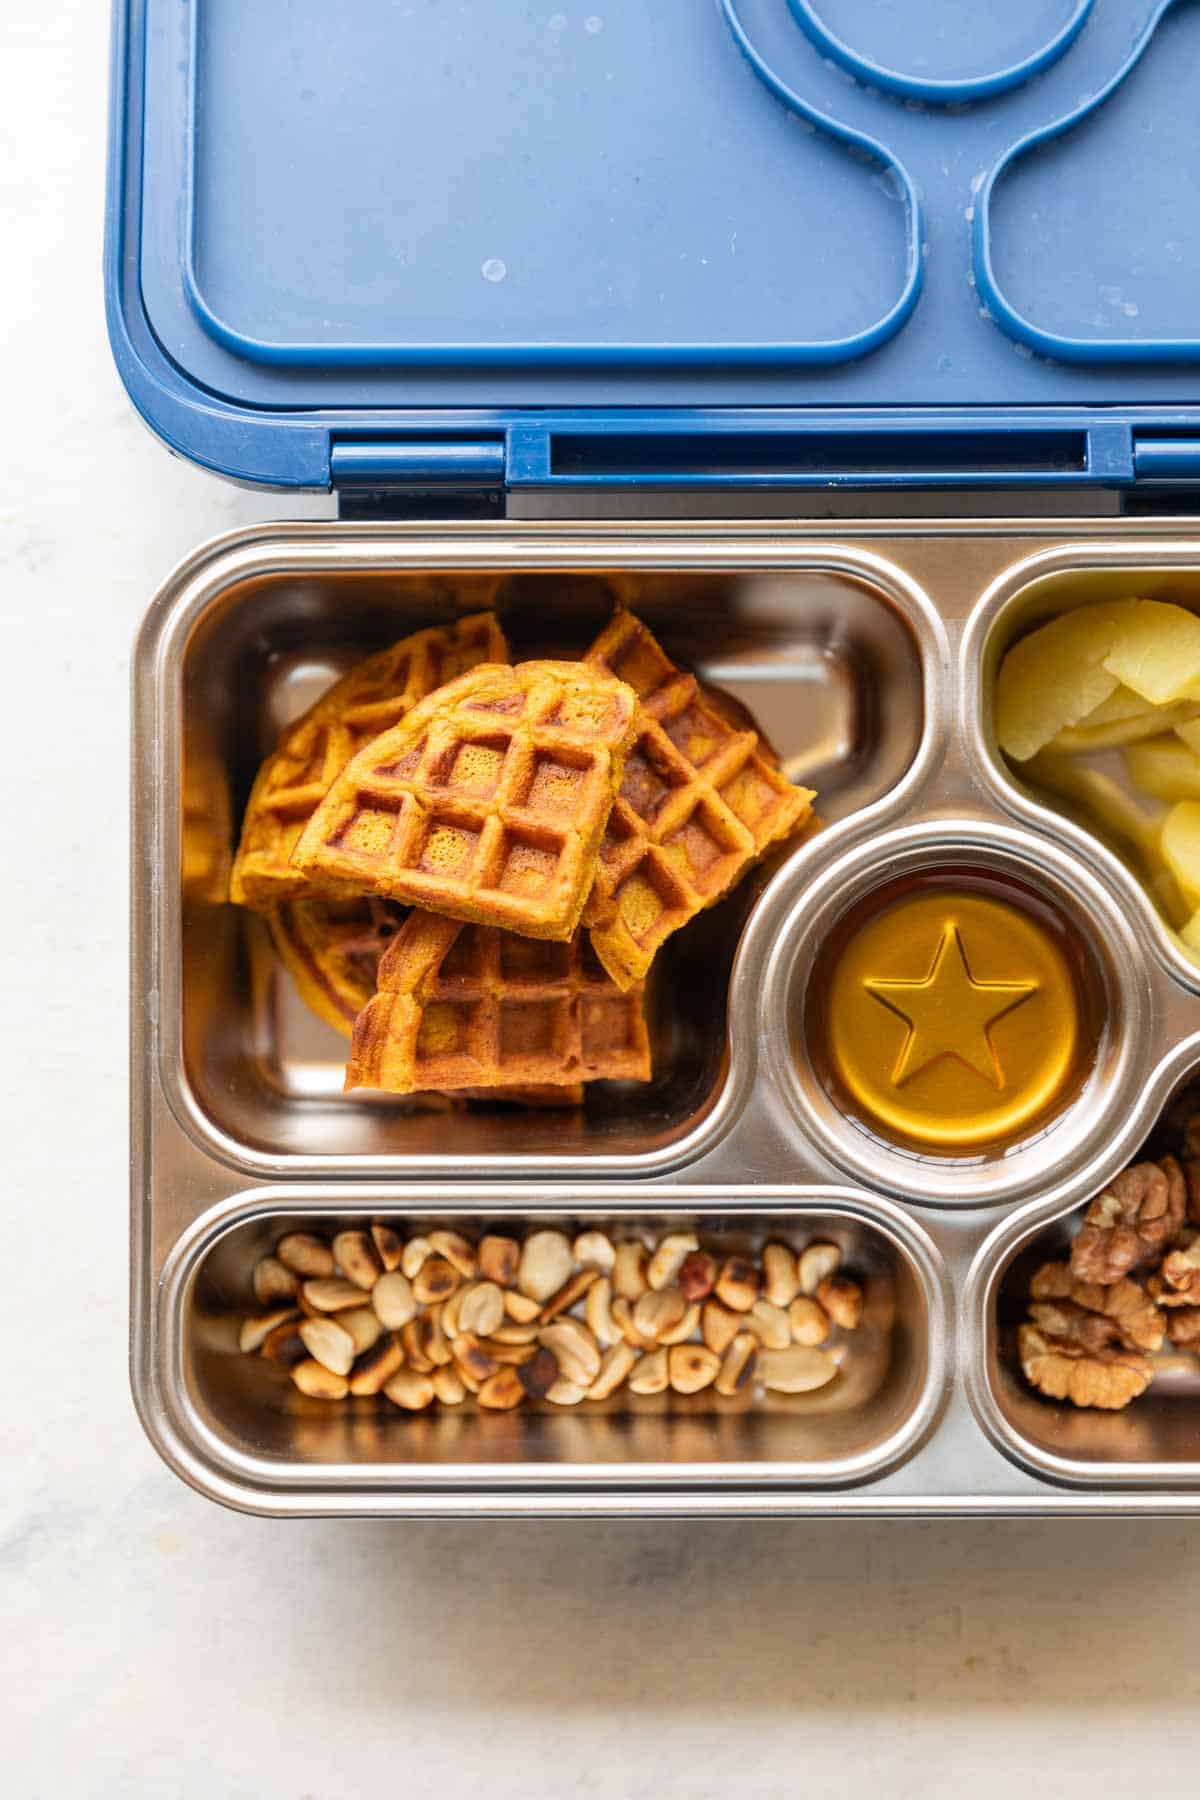 Pumpkin waffles in a kids lunch box along with other foods